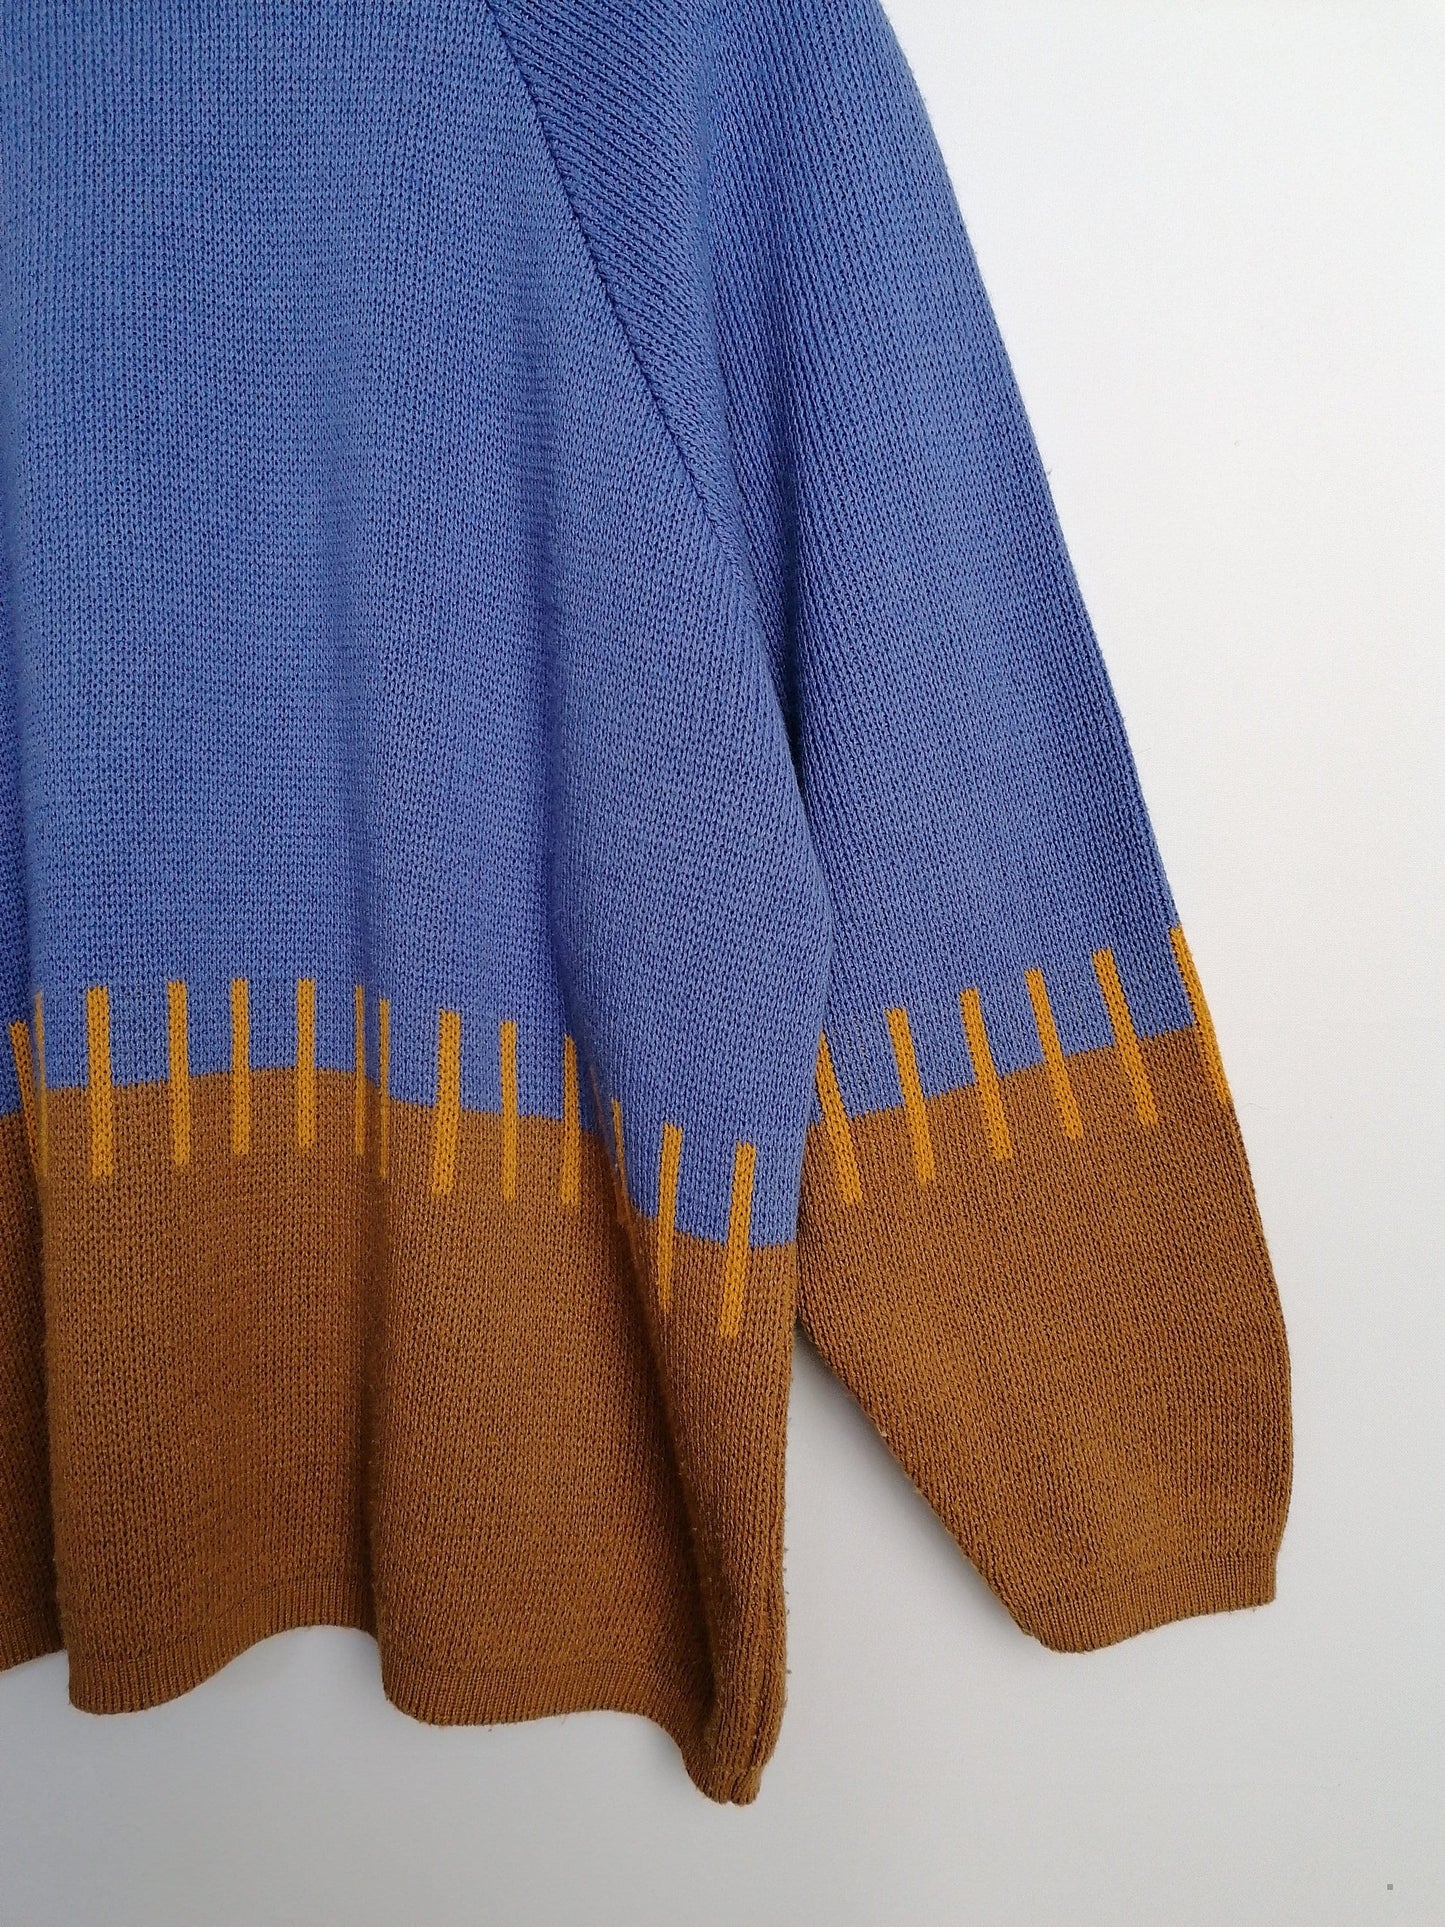 Graphic Pattern Knit Sweater Blue and Burnt Orange - size S-M